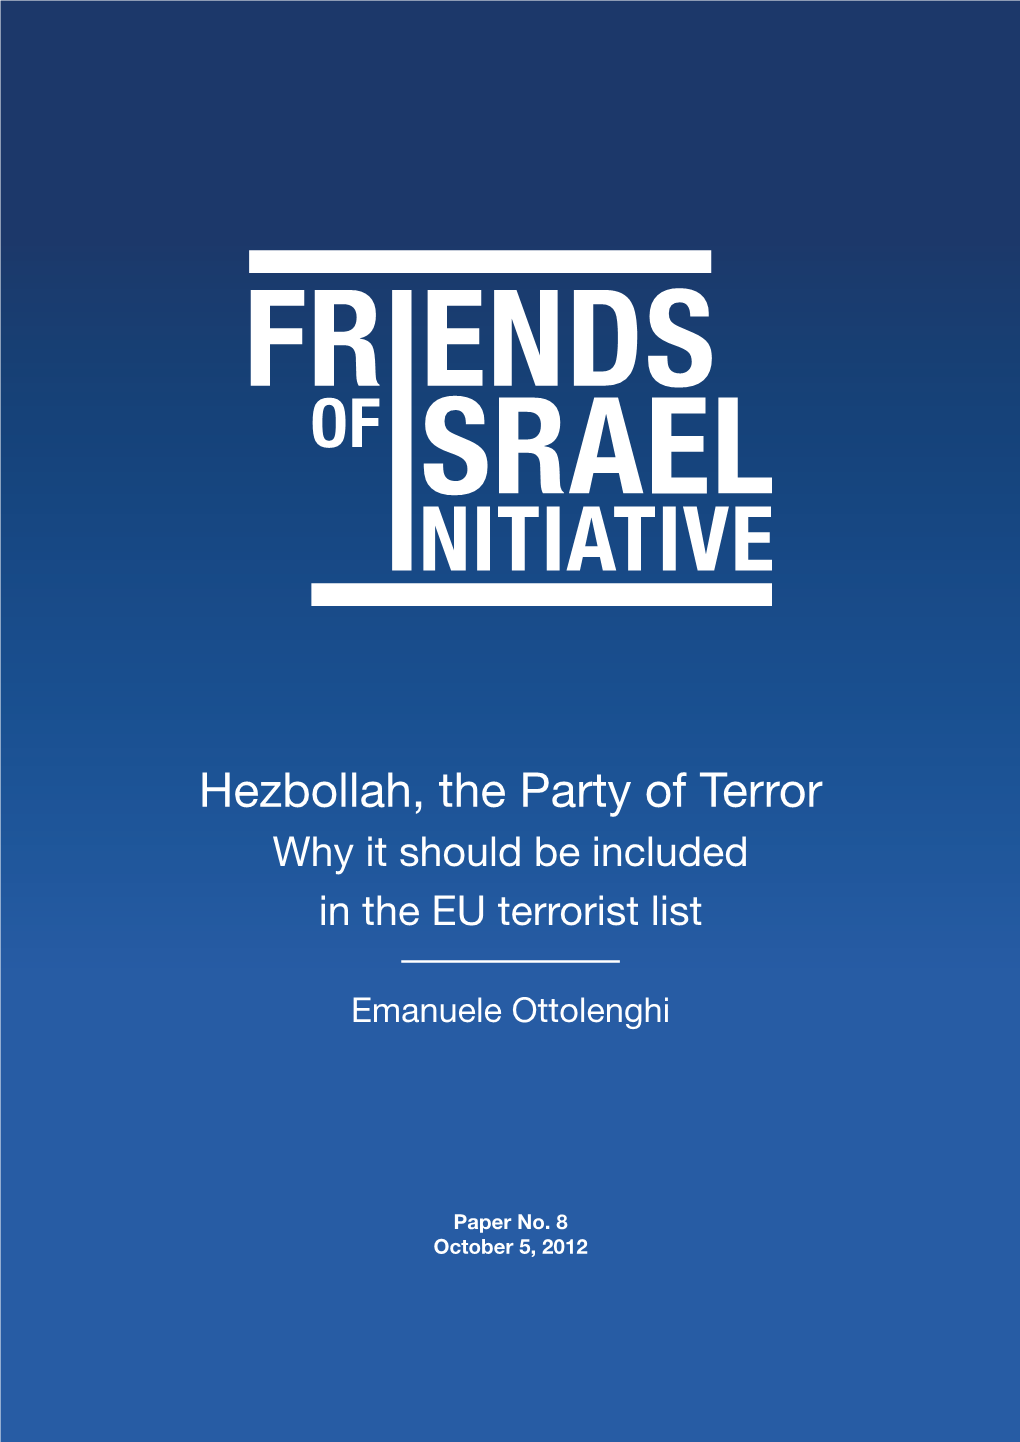 Hezbollah, the Party of Terror Why It Should Be Included in the EU Terrorist List